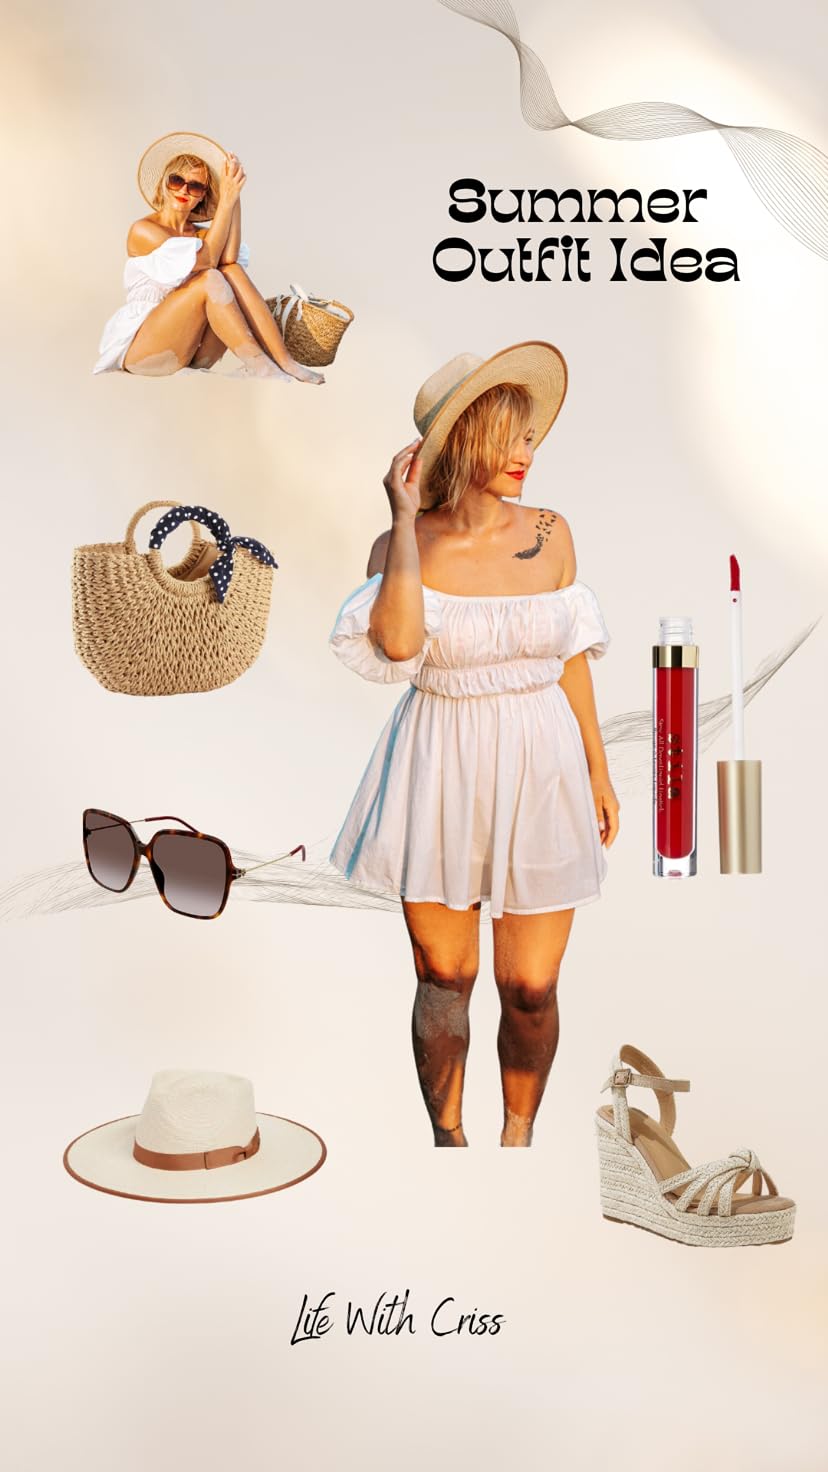 SUMMER OUTFIT IDEA